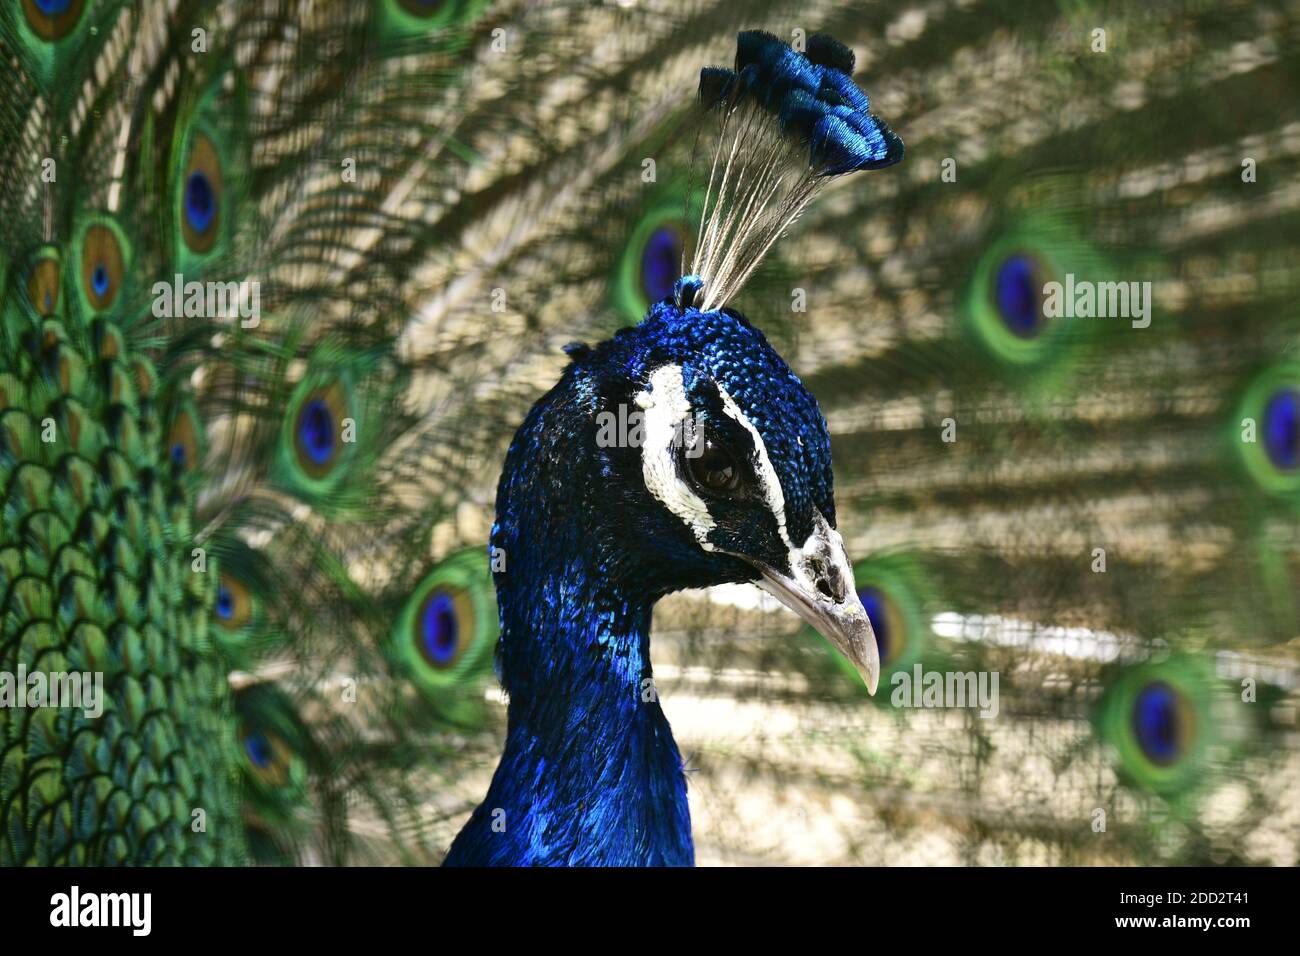 Blue peacock brocade and crown Stock Photo